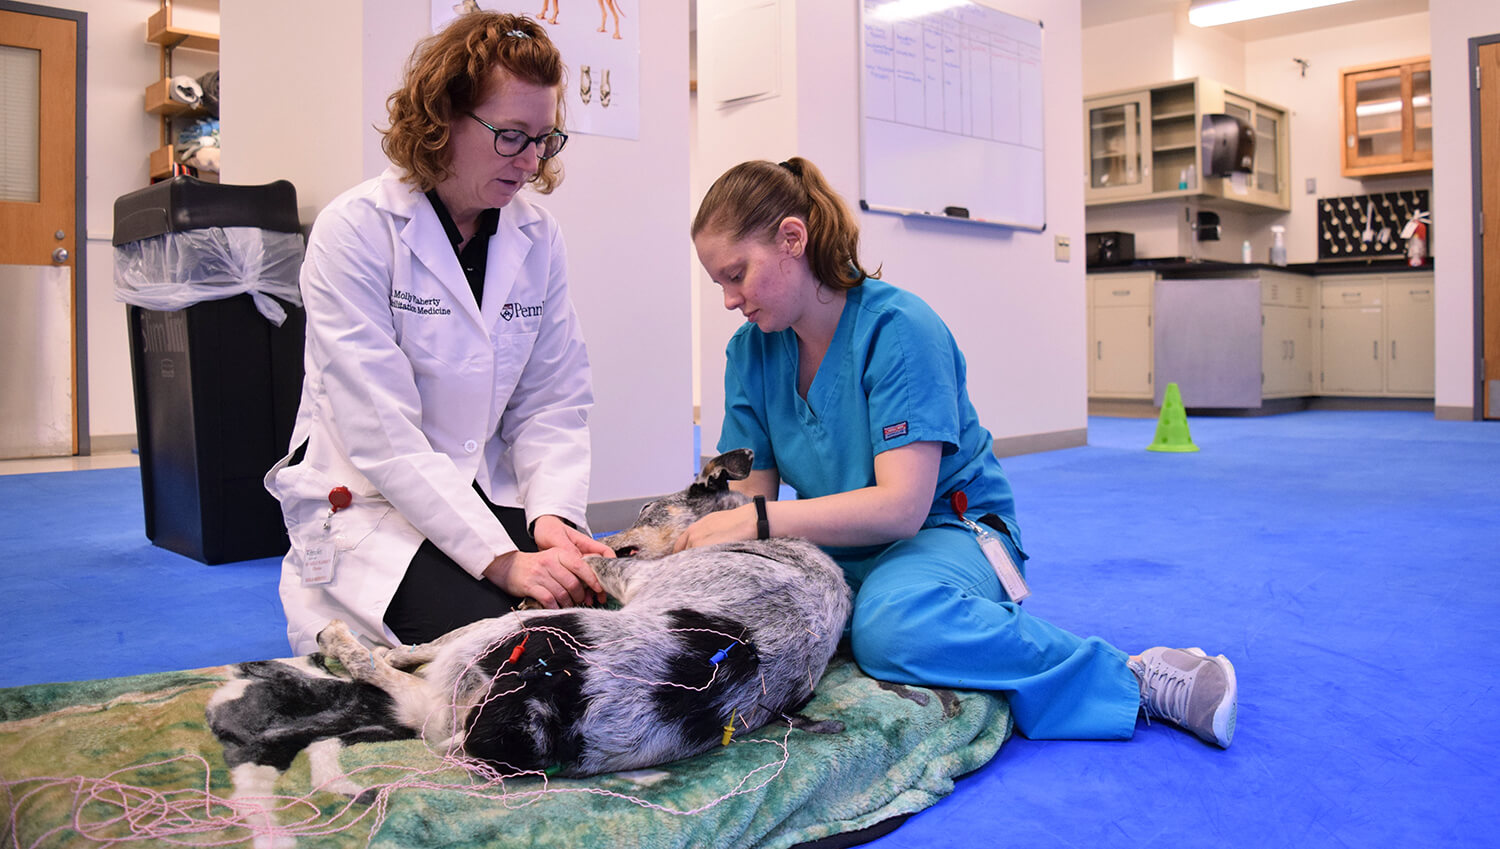 Dr. Molly Flaherty applies acupuncture to Ranger which facilitates healing, pain relief, and mobility.